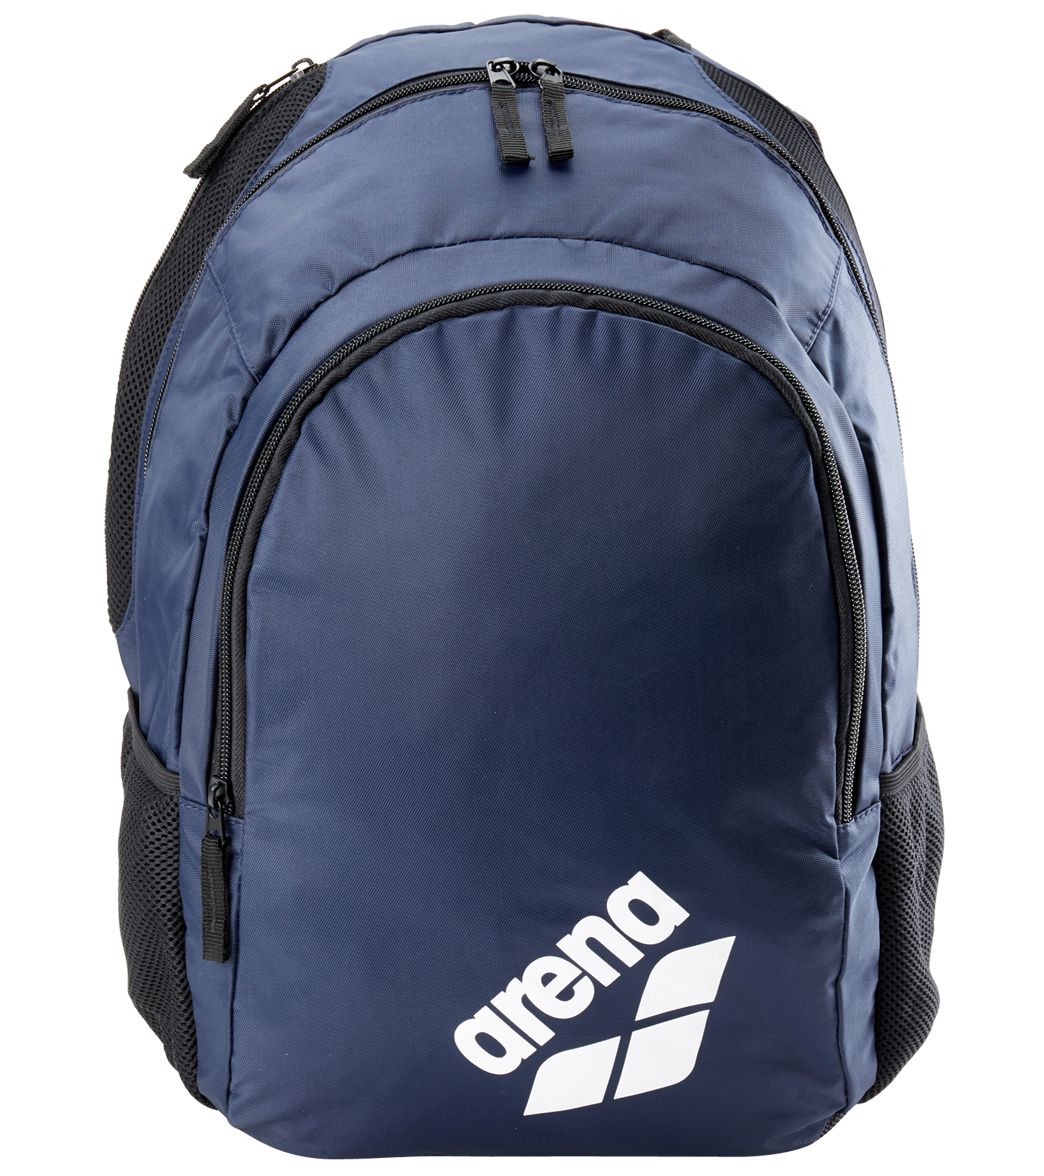 Arena Spiky 2 Backpack at SwimOutlet.com